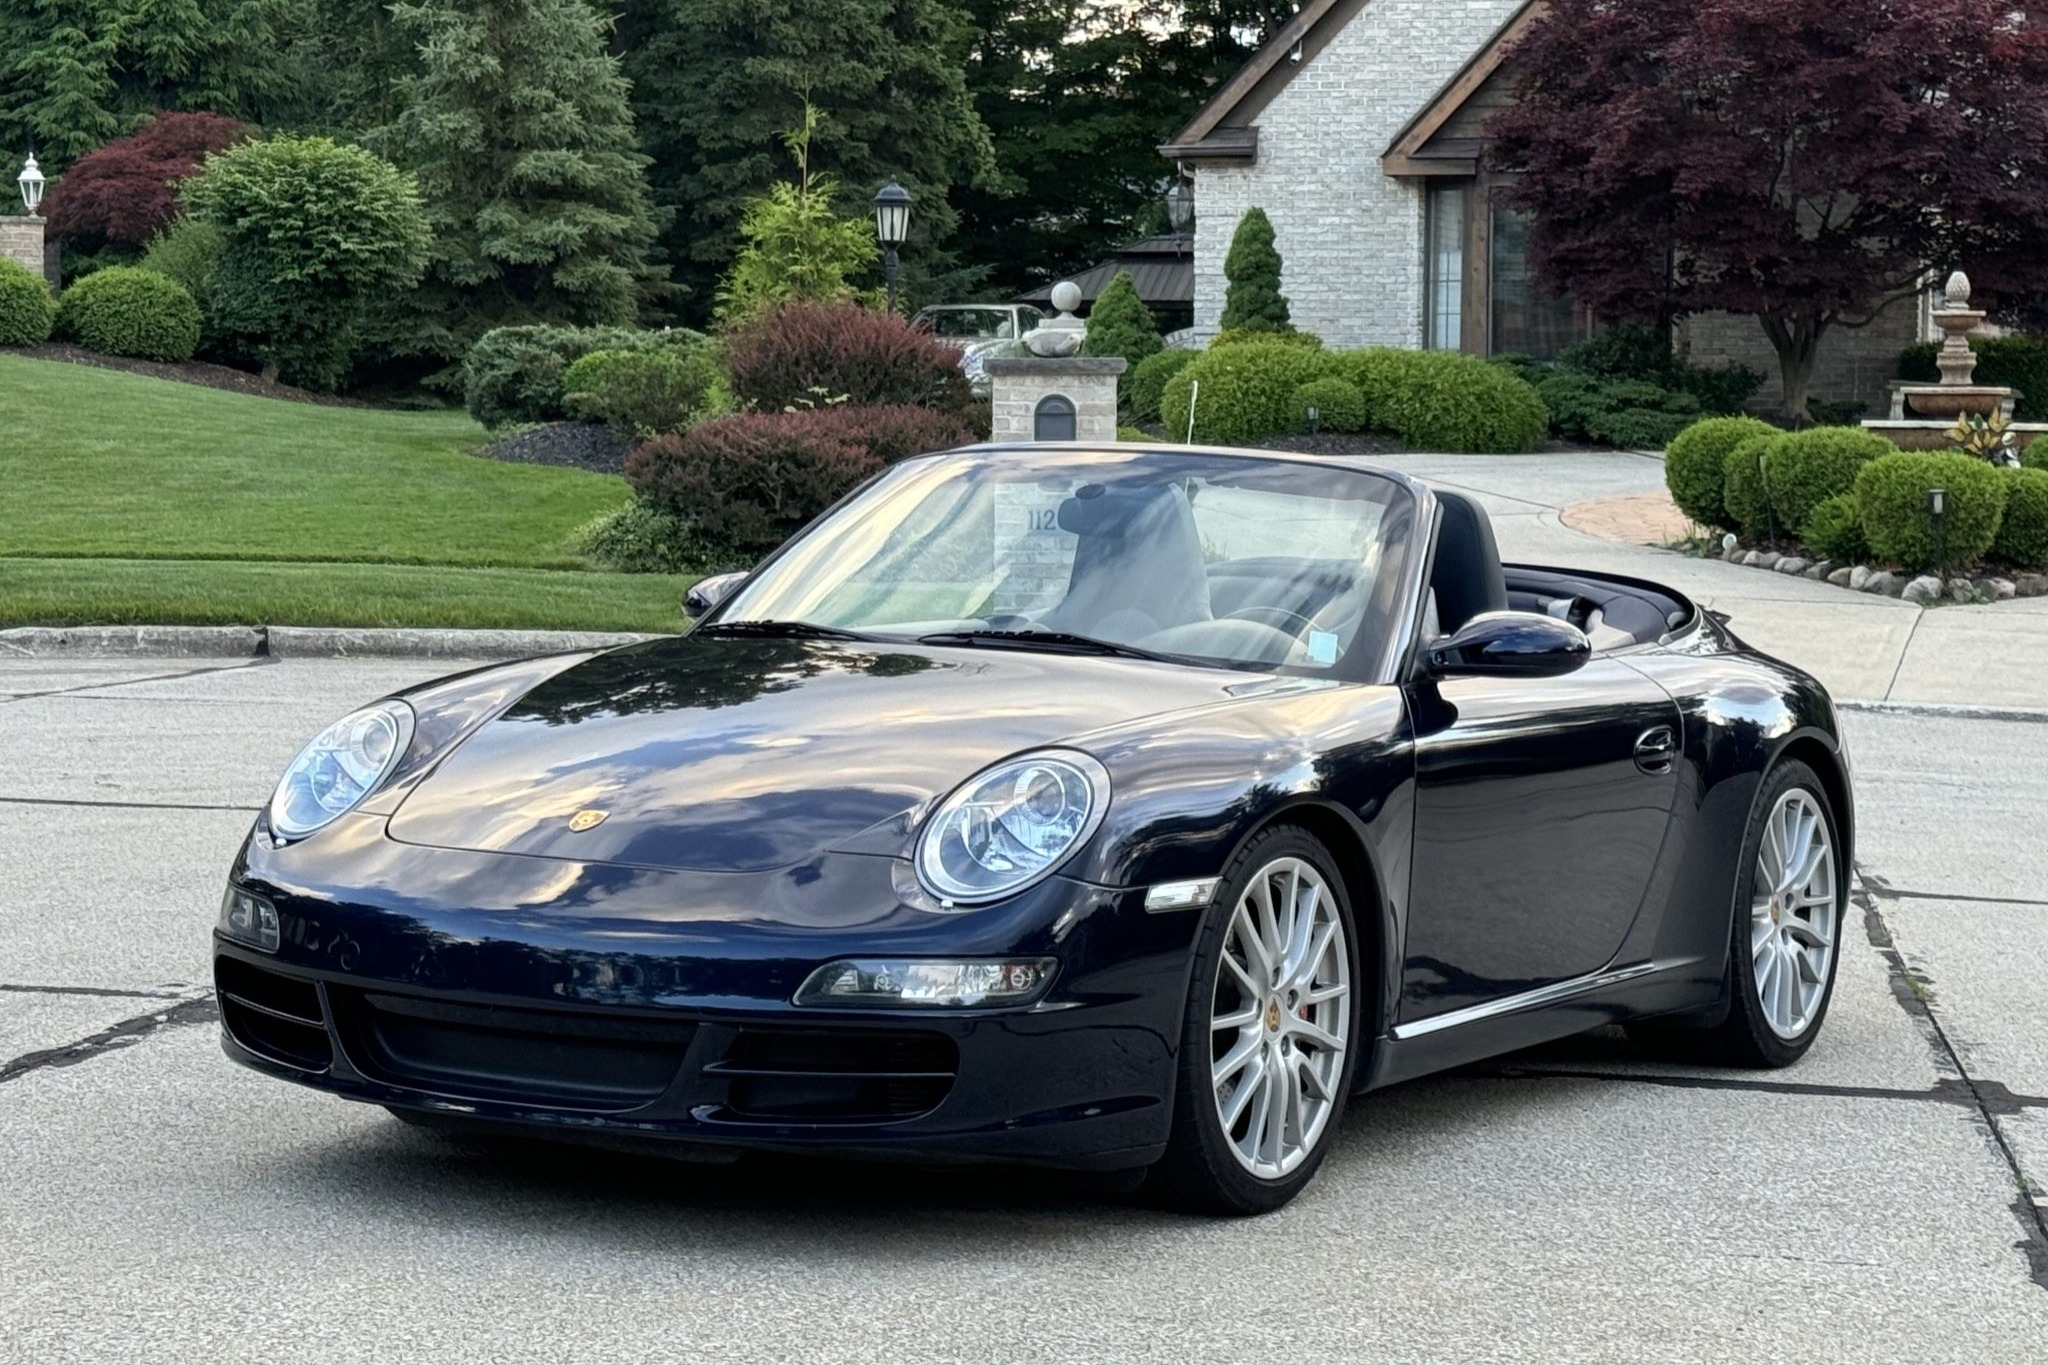 Used 2006 Porsche 911 Carrera S Cabriolet 6-Speed Review